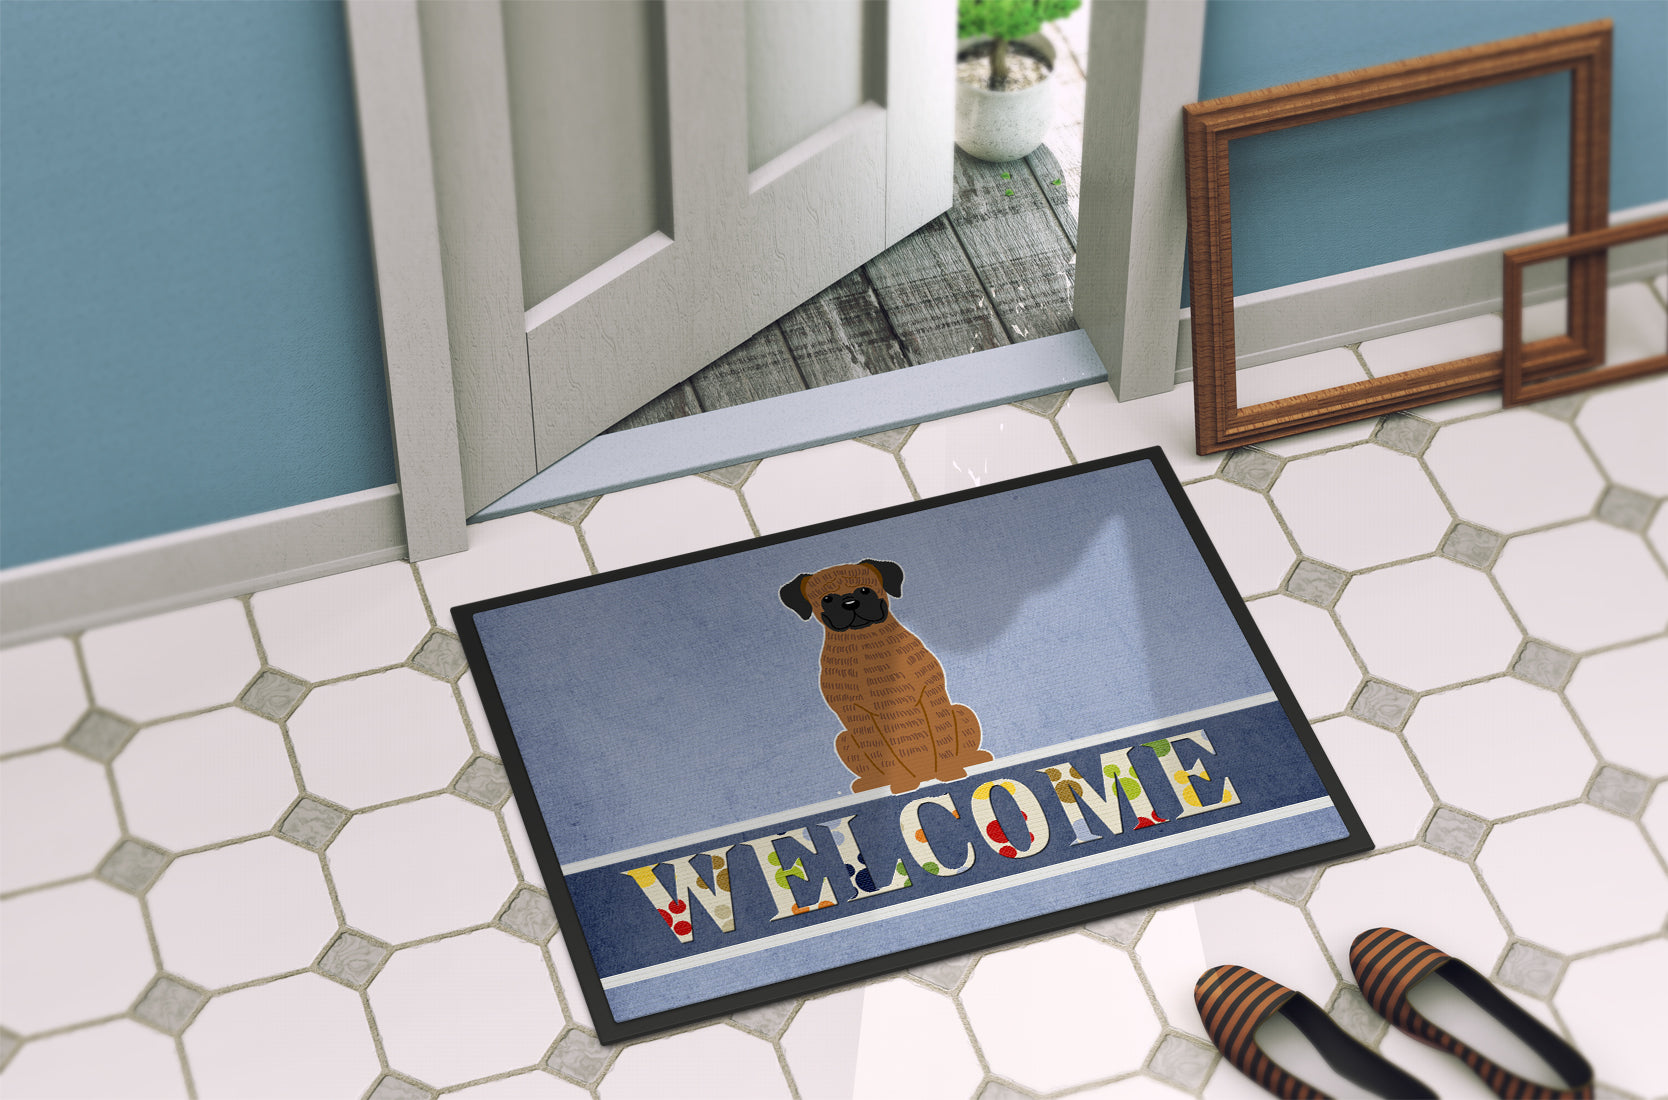 Brindle Boxer Welcome Indoor or Outdoor Mat 18x27 BB5698MAT - the-store.com